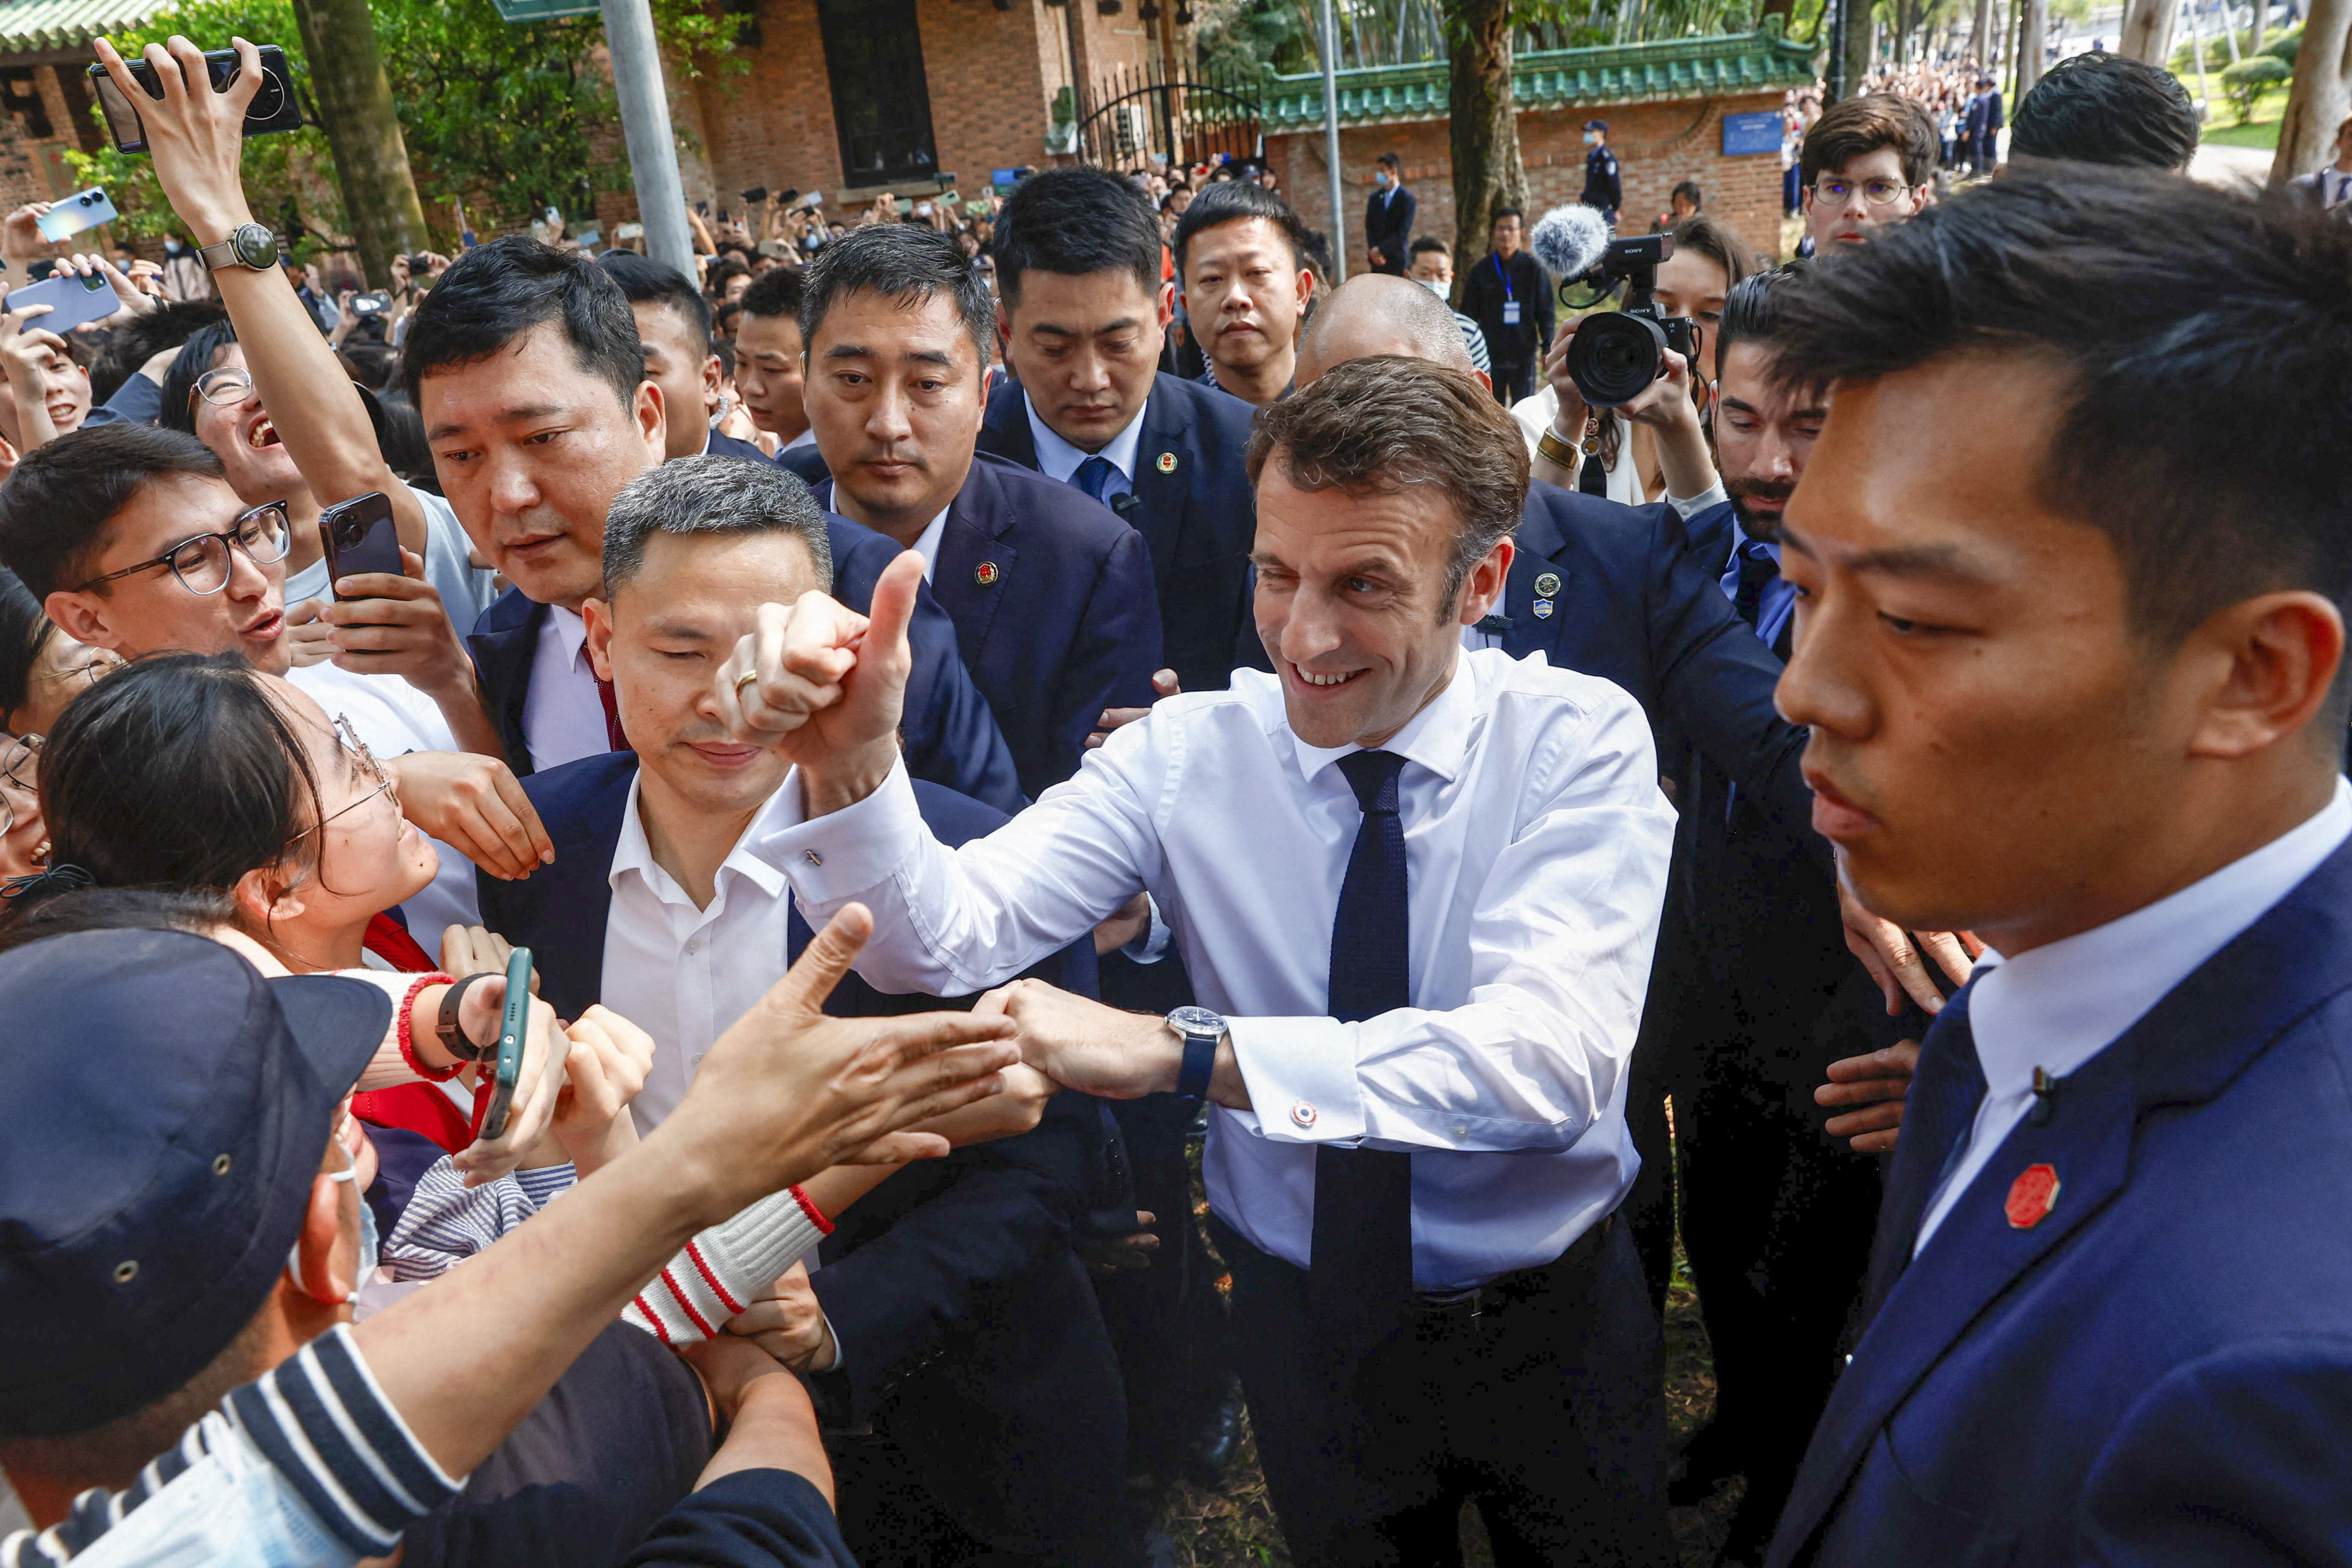 French President Emmanuel Macron is greeted by students as he arrives at Sun Yat-sen University in Guangzhou on Friday. Photo: AFP